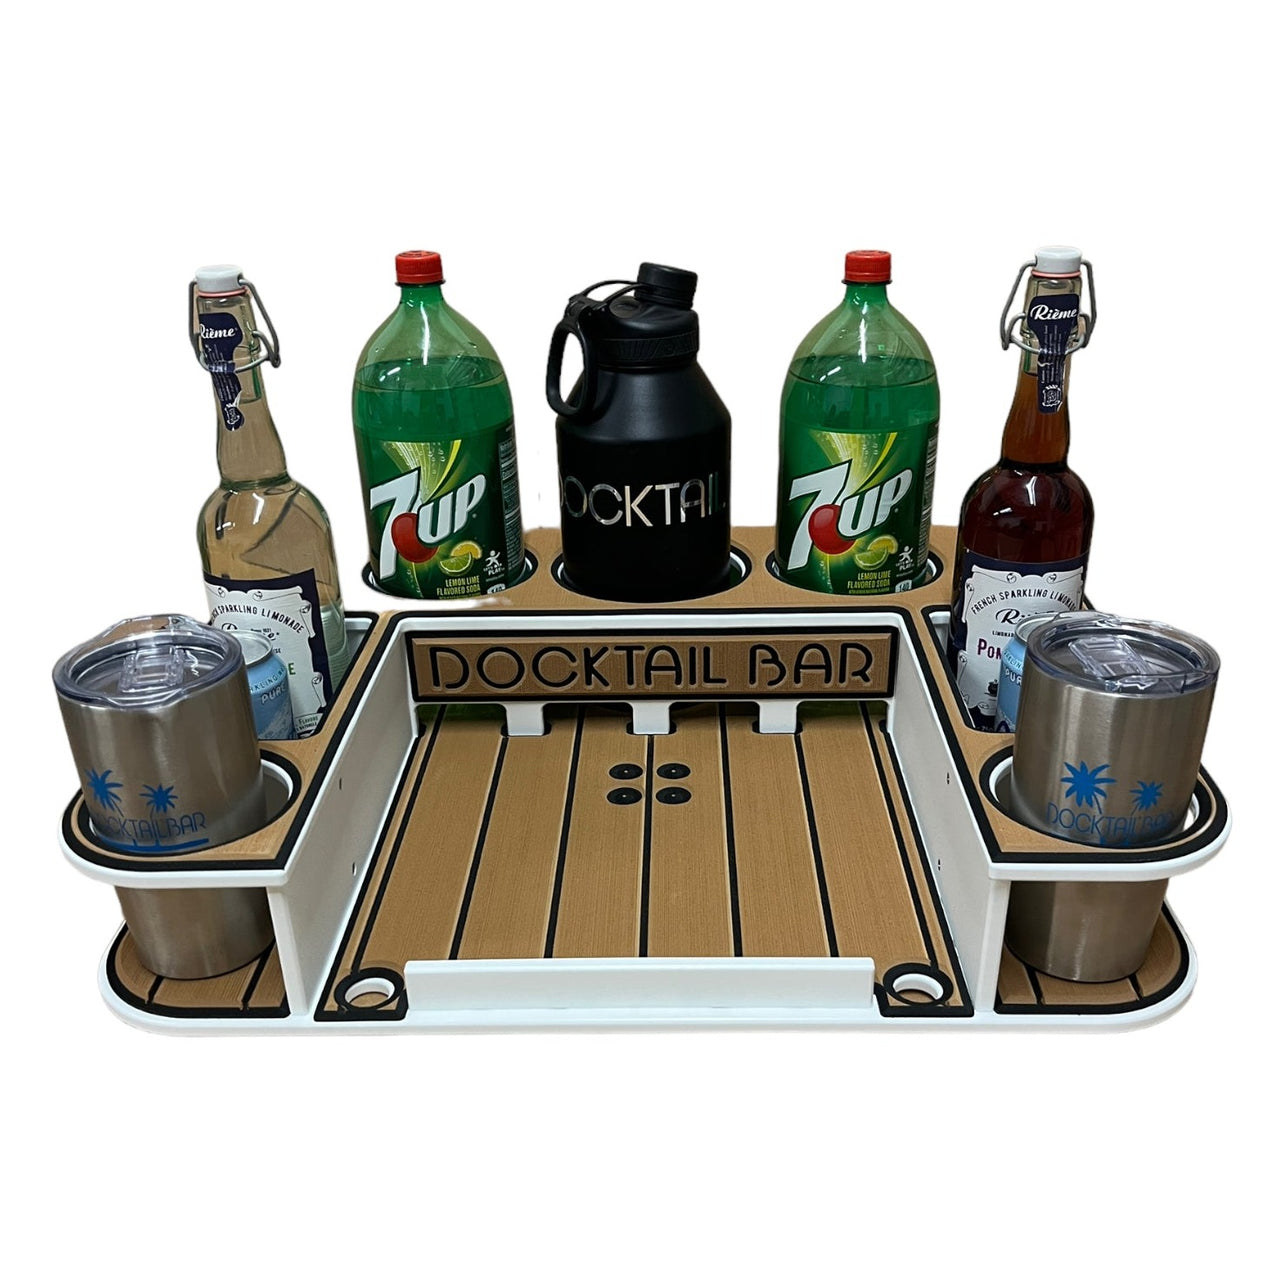 Docktail Butler Boat Table and Storage Accessory - Choose Your Mount & Color